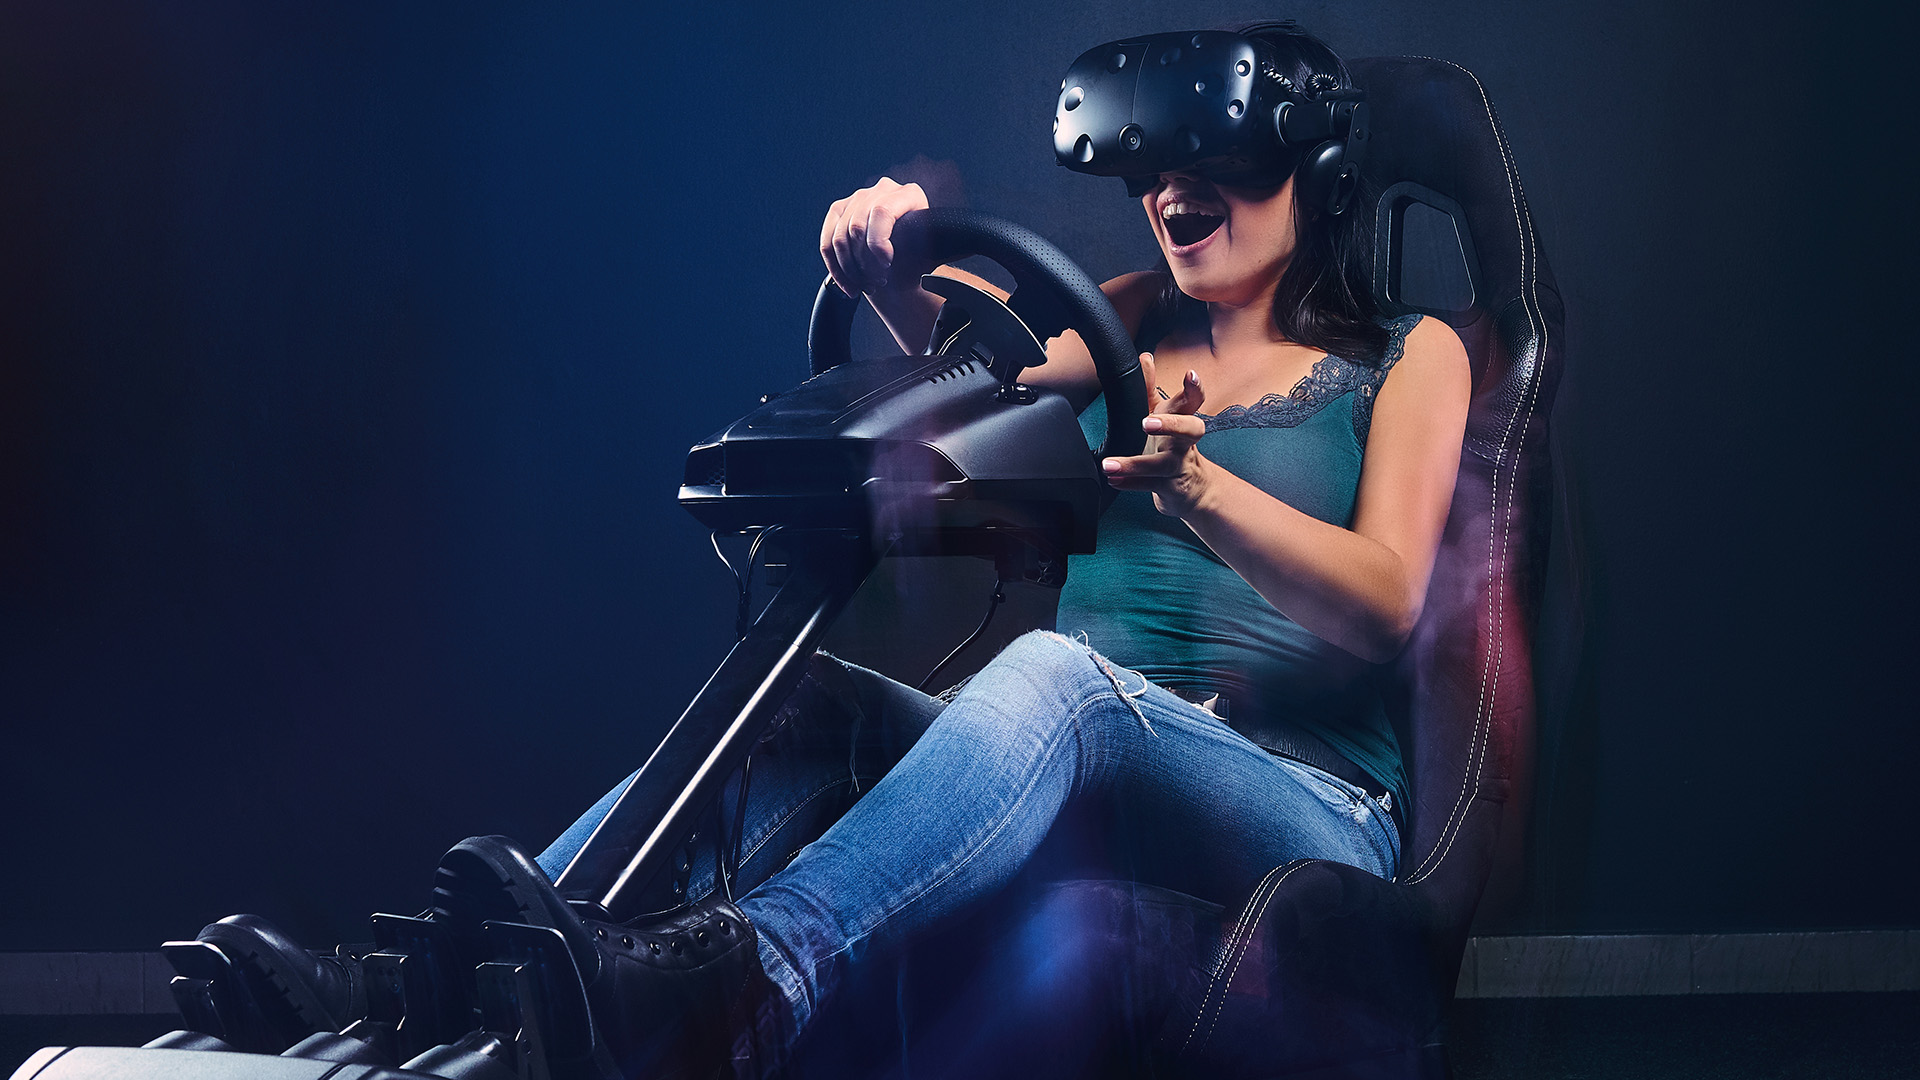 Virtual Reality Gaming Accessories Market'